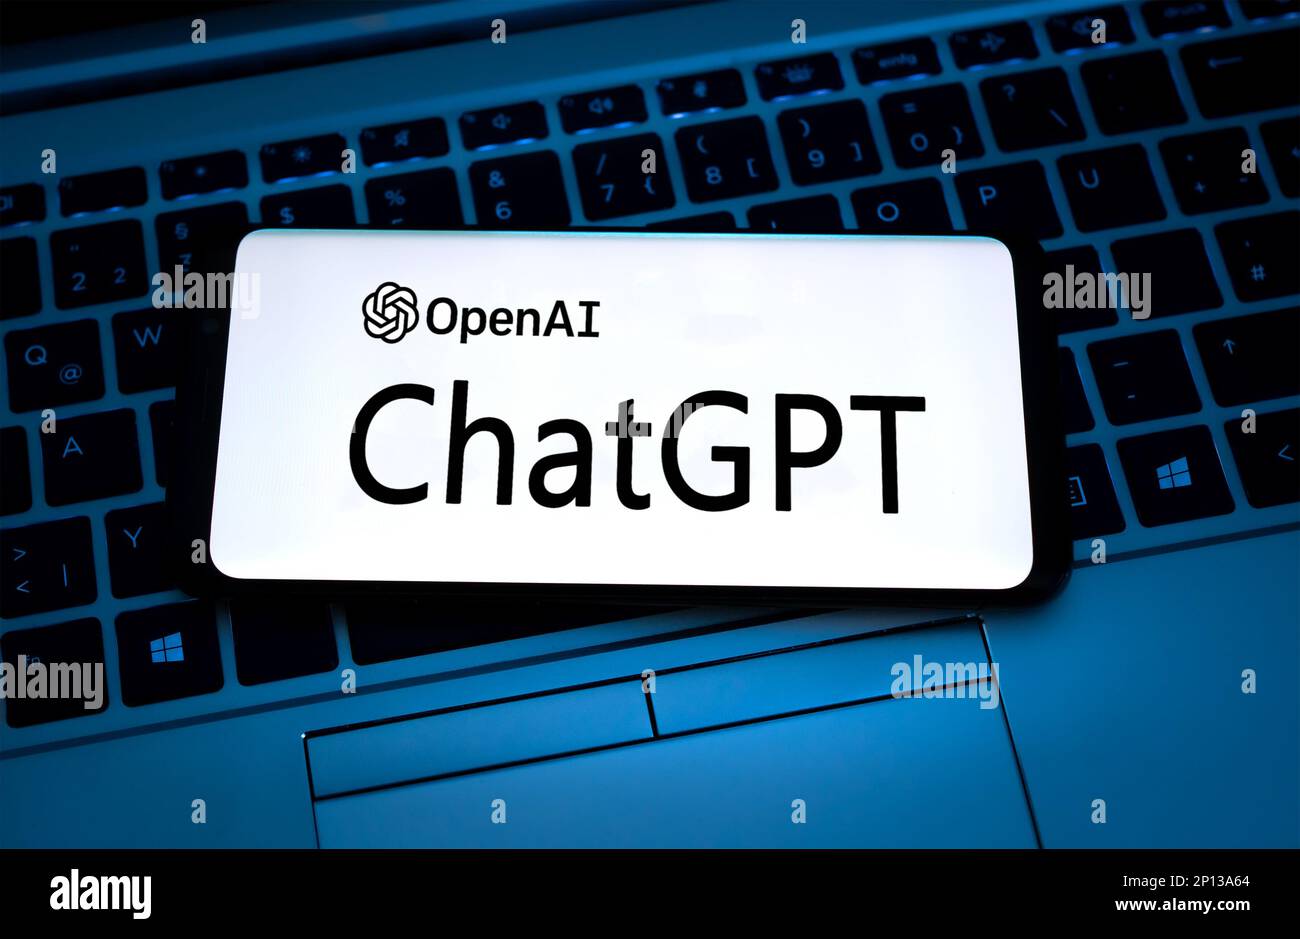 ChatGPT - artificial intelligence chatbot by OpenAI Stock Photo